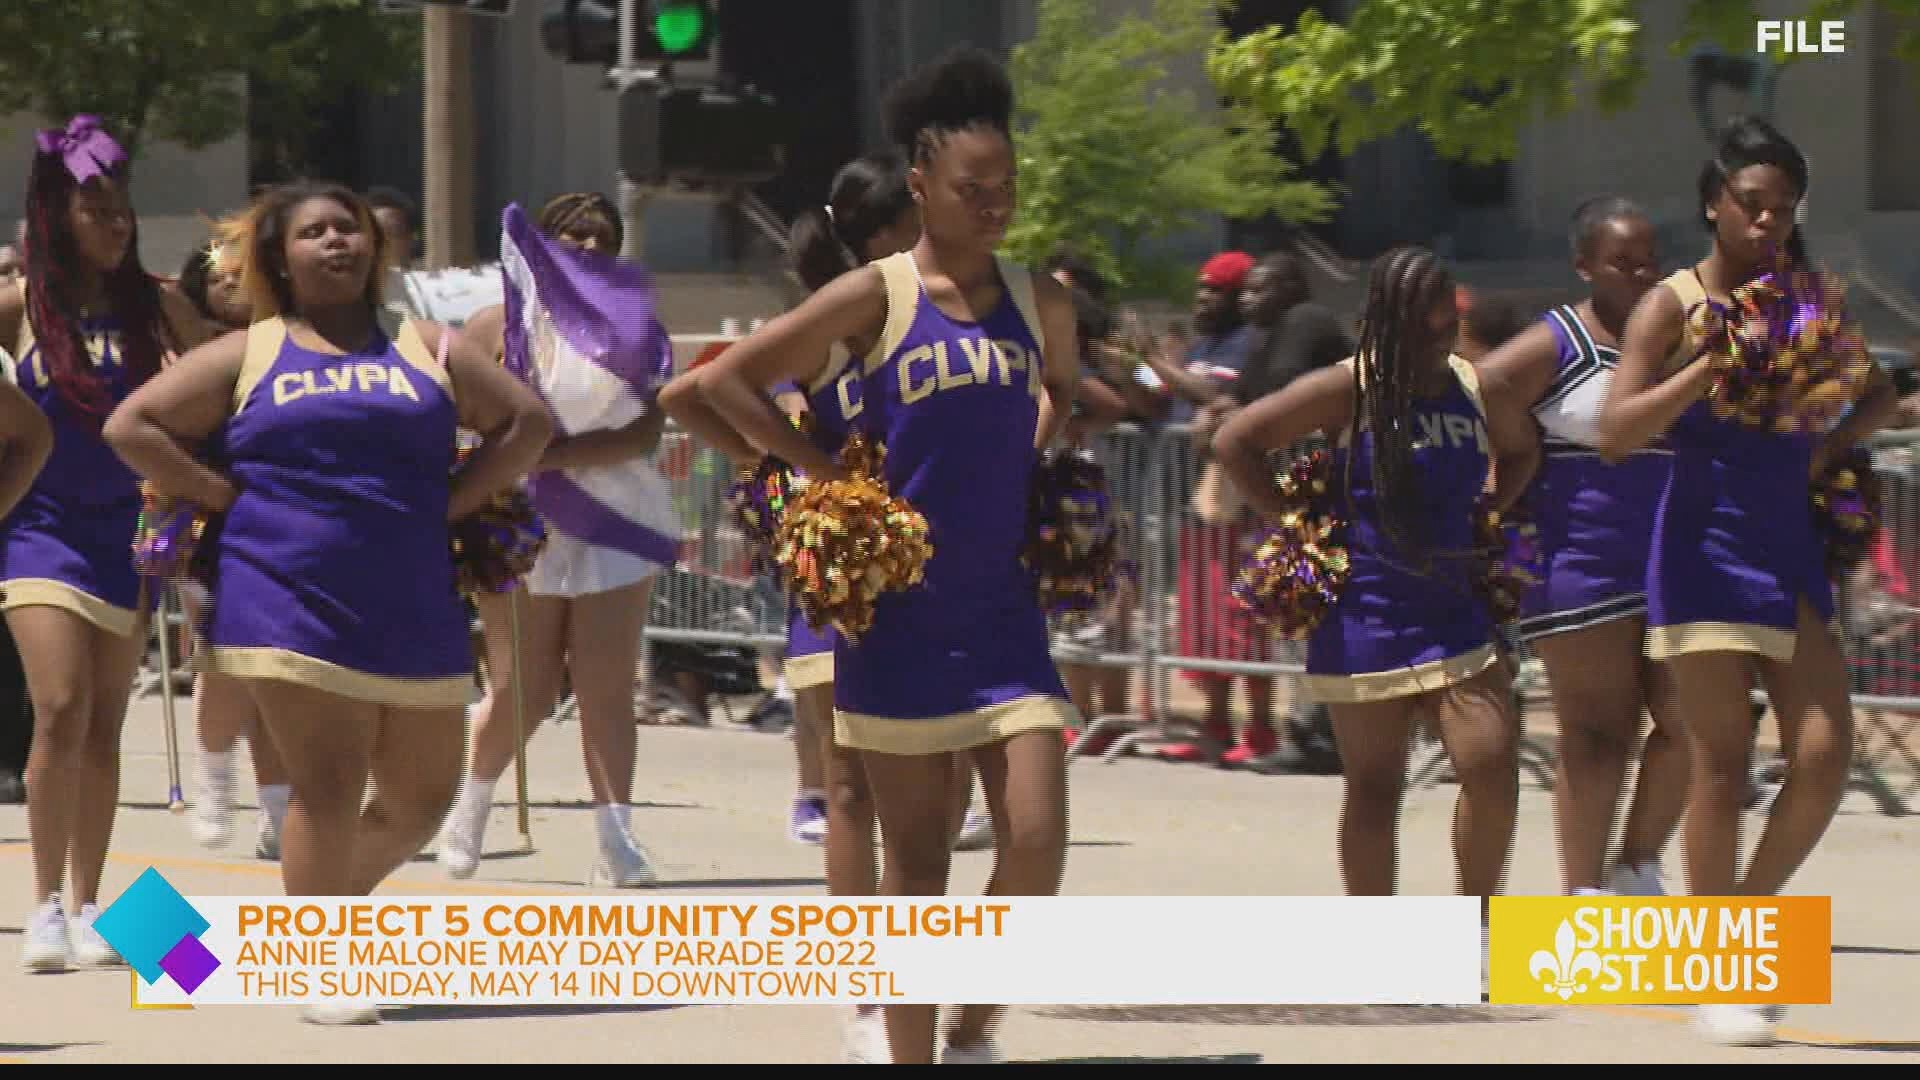 A historic parade is making a return to the streets of St. Louis, for the first time since the pandemic.